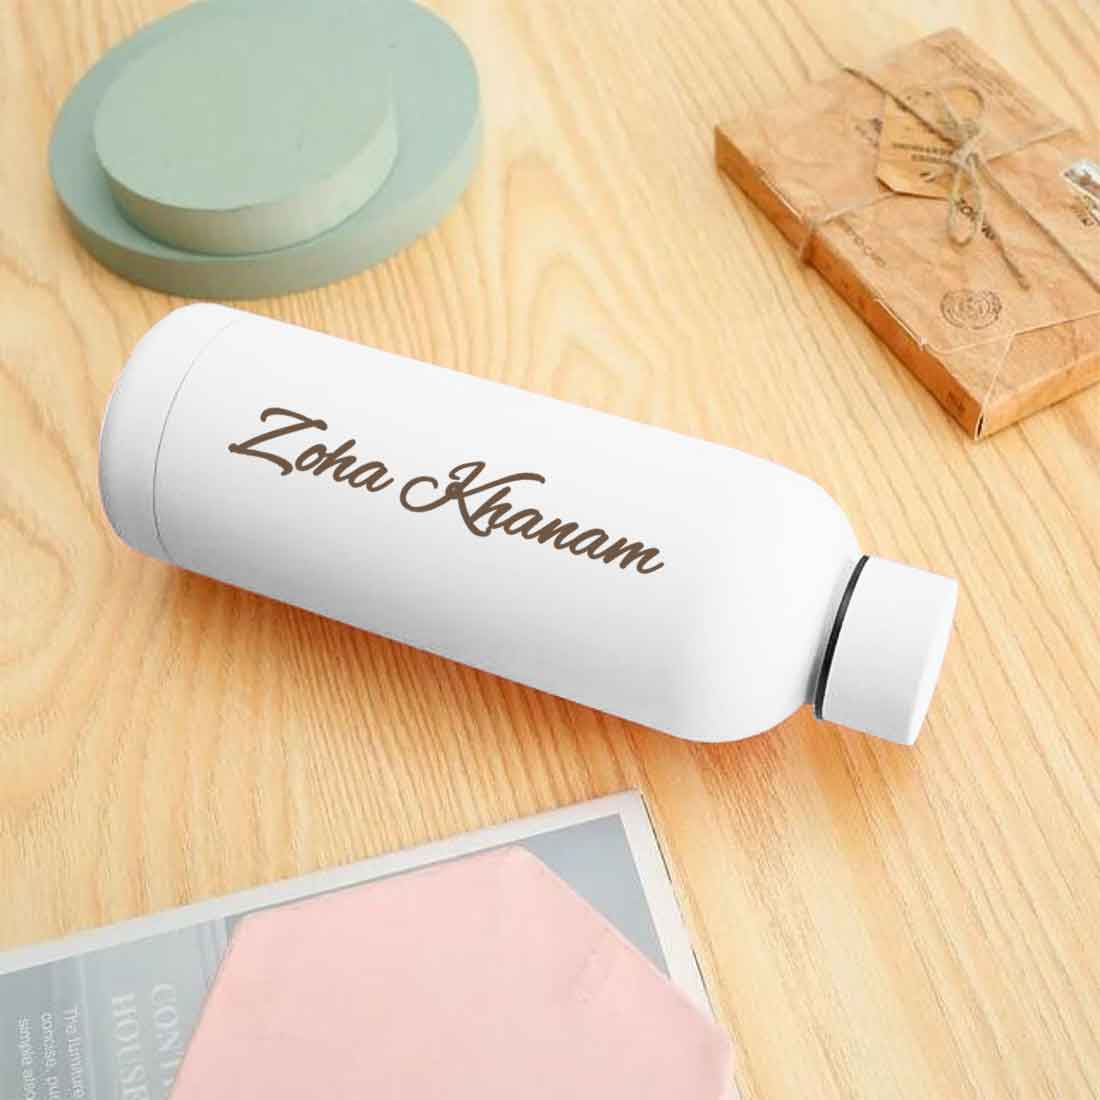 Stainless Steel Water Bottle with Names 500ml Double Insulated Bottles for Office Home Travel- BPA Free, Leakproof- Set OF 2